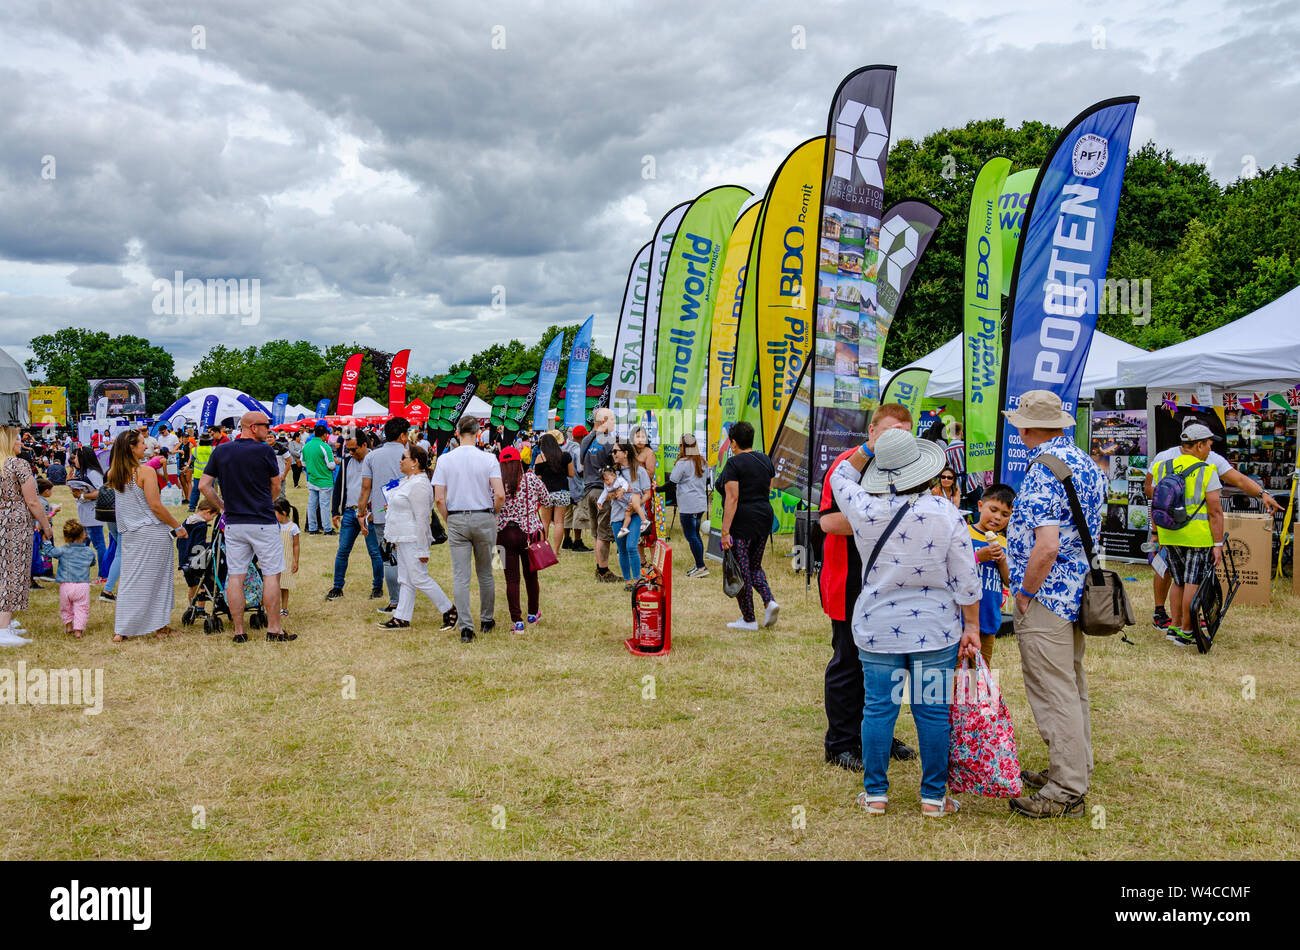 London, UK - July 21st 2019: The Barrio Fiesta 2019 took place on Apps Court Farm at Walton-on-Thames. An annual festival celebrating Filipino culture Stock Photo